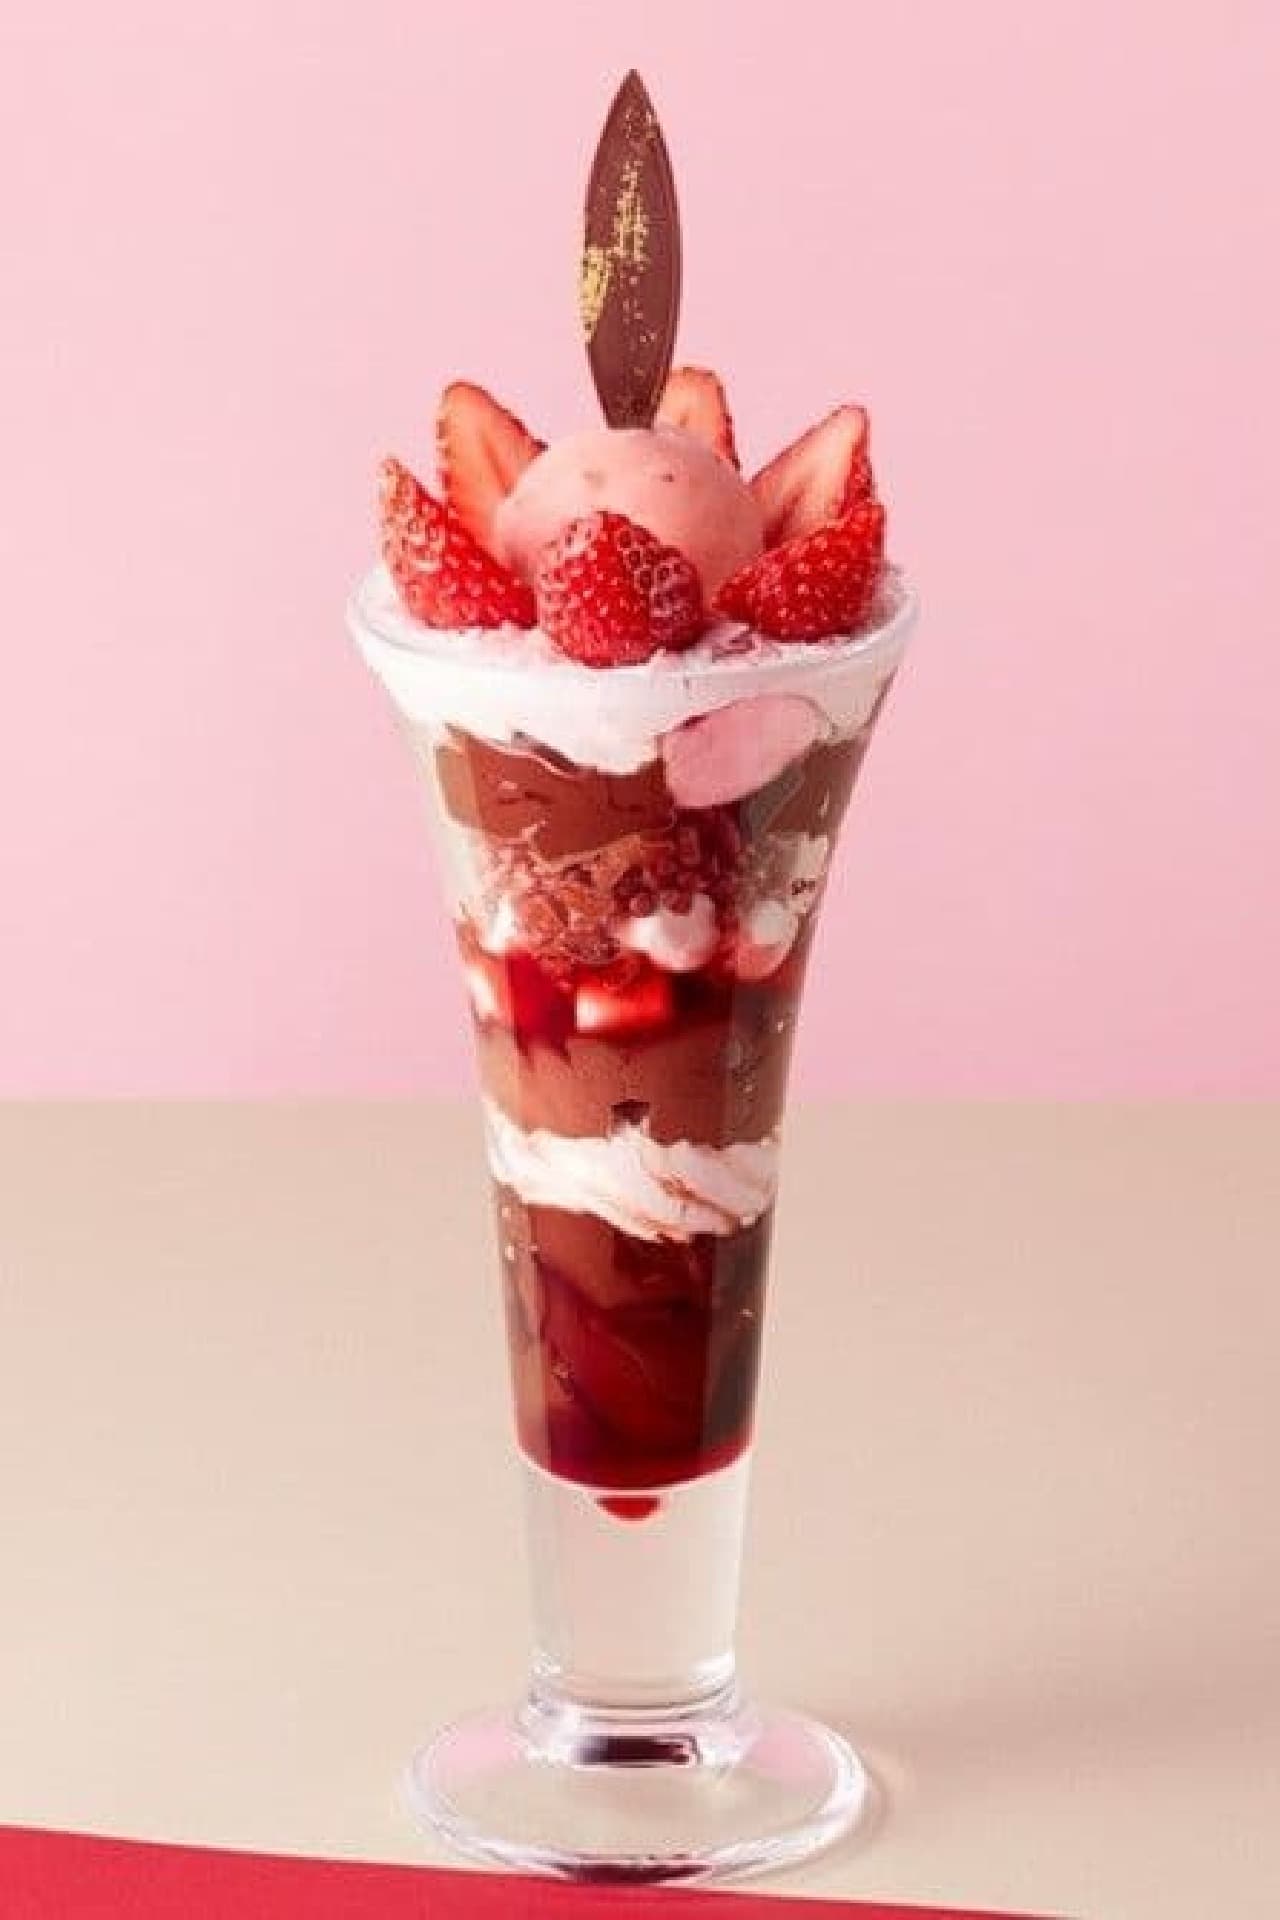 Coco's "Flower-blooming Strawberry and Chocolate Parfait"